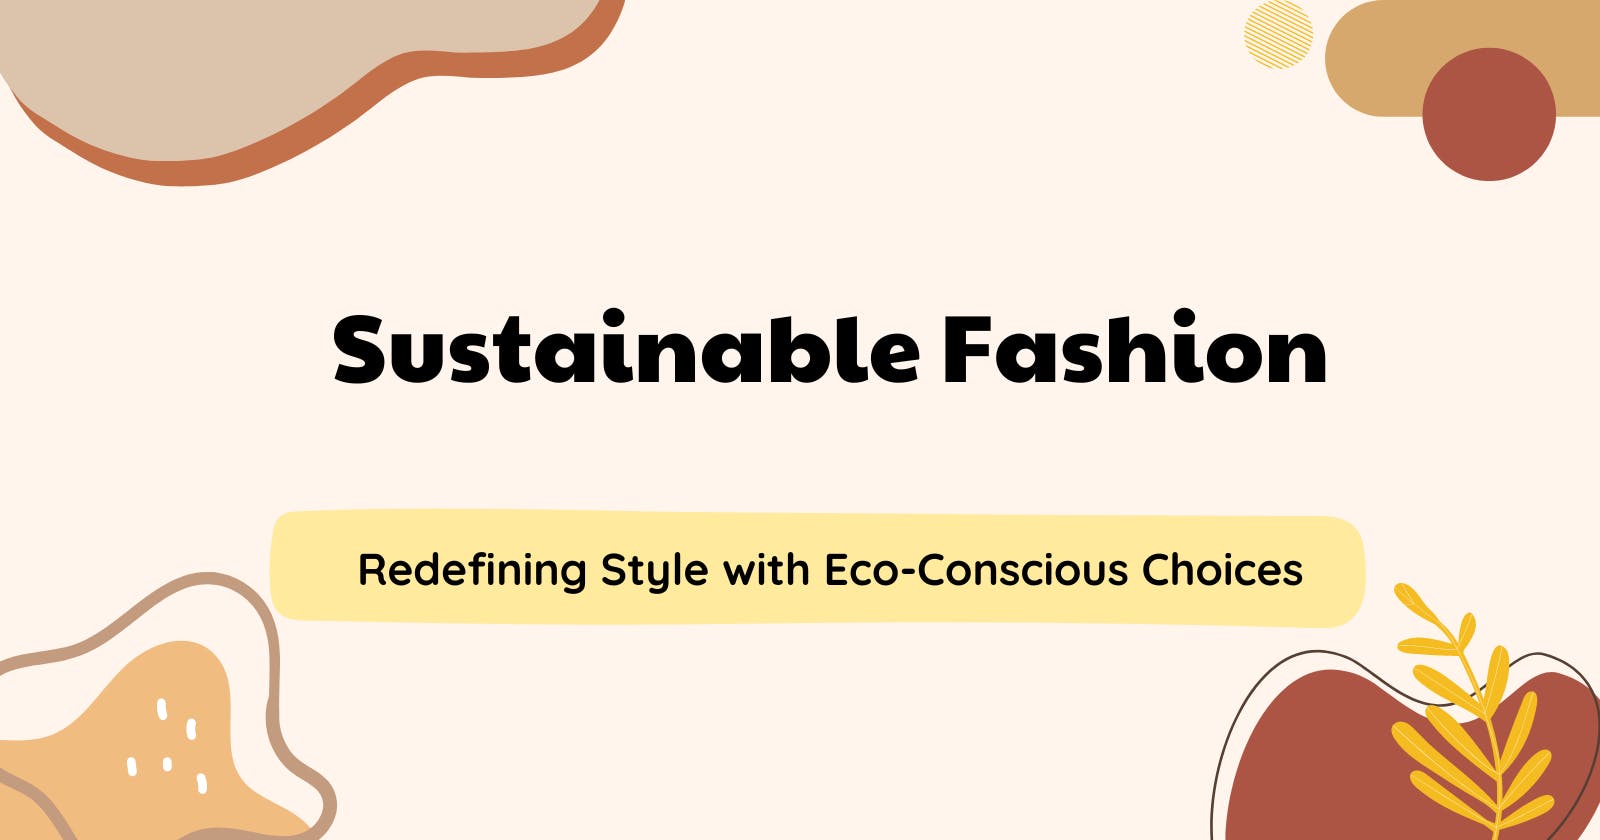 Sustainable Fashion: Redefining Style with Eco-Conscious Choices